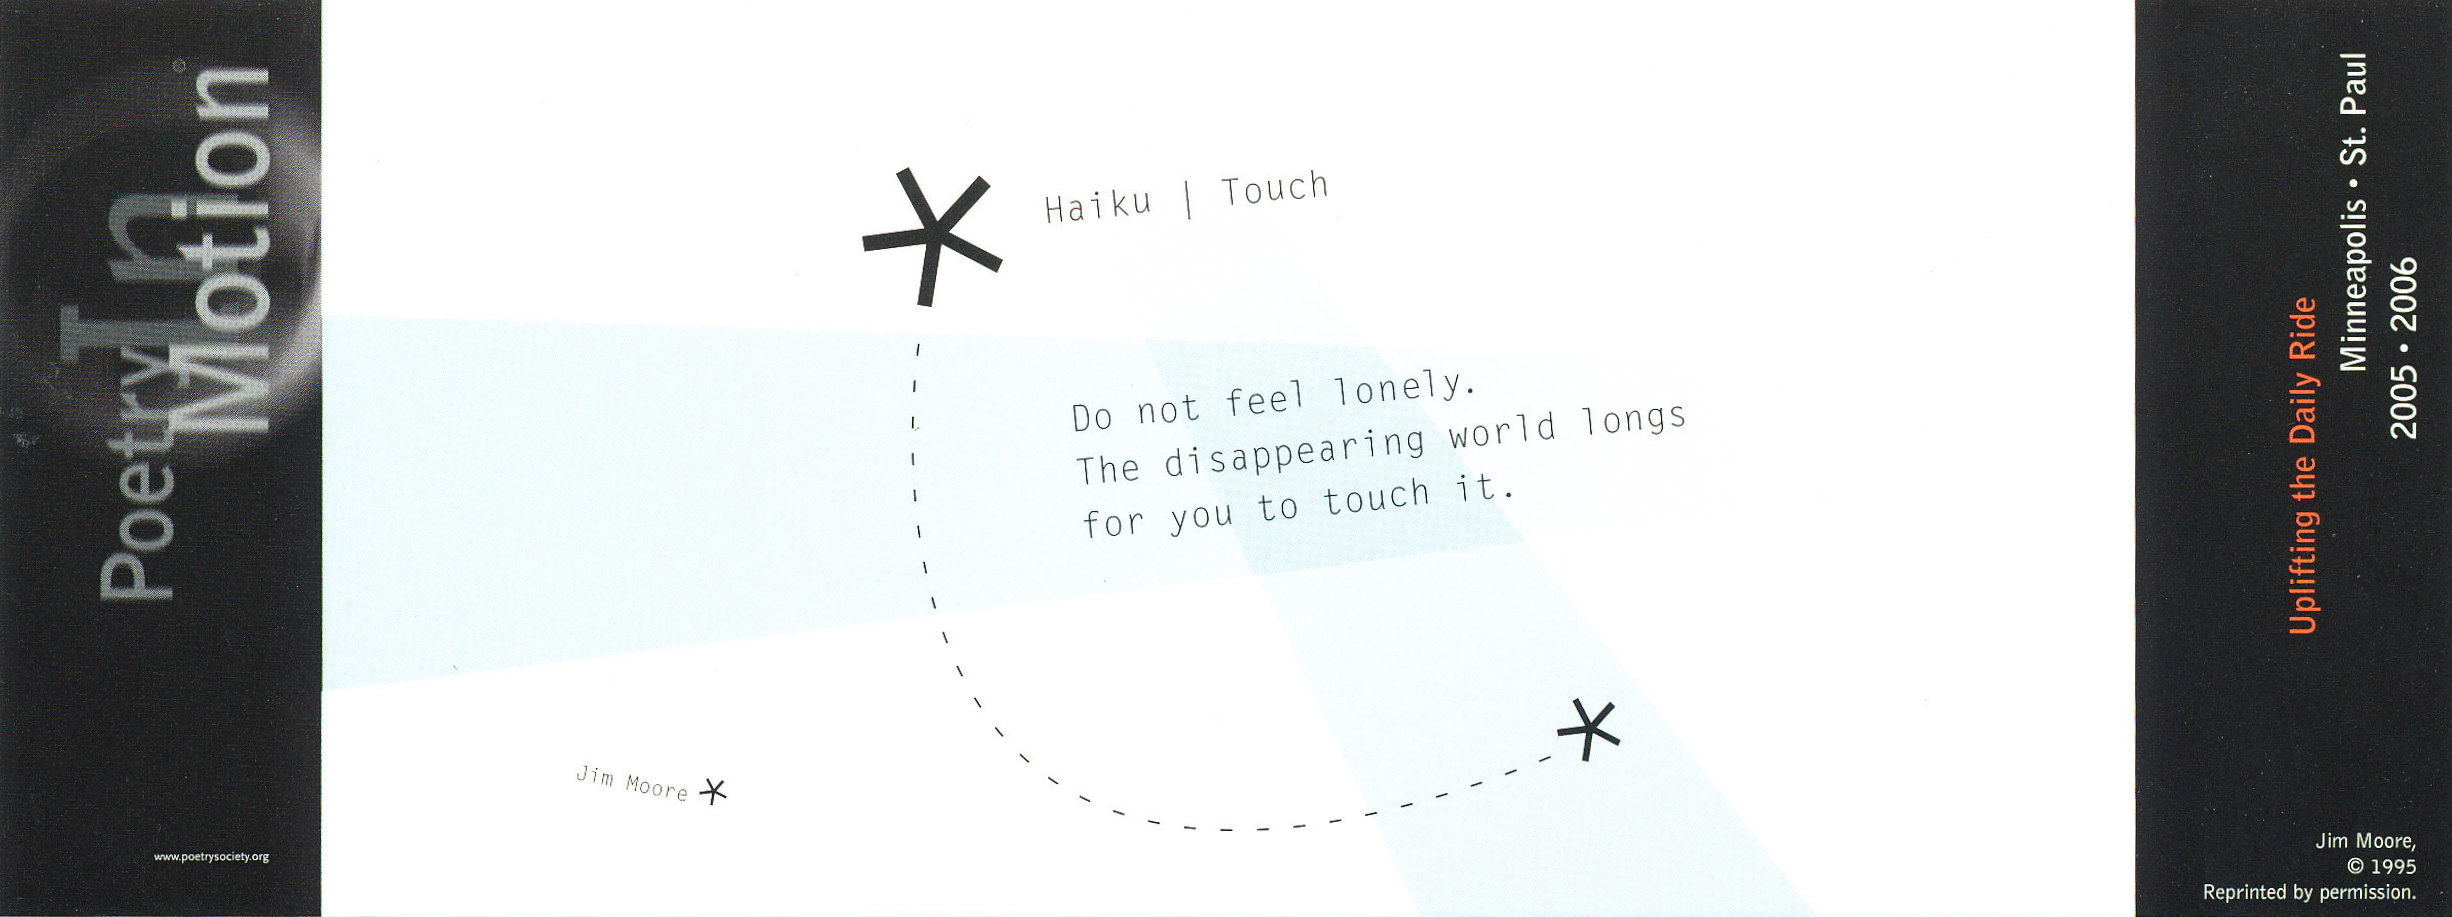 A white poster depicts two asterisks connected by a dotted line. The poem, Haiku/touch by Jim Moore is written in grey text.